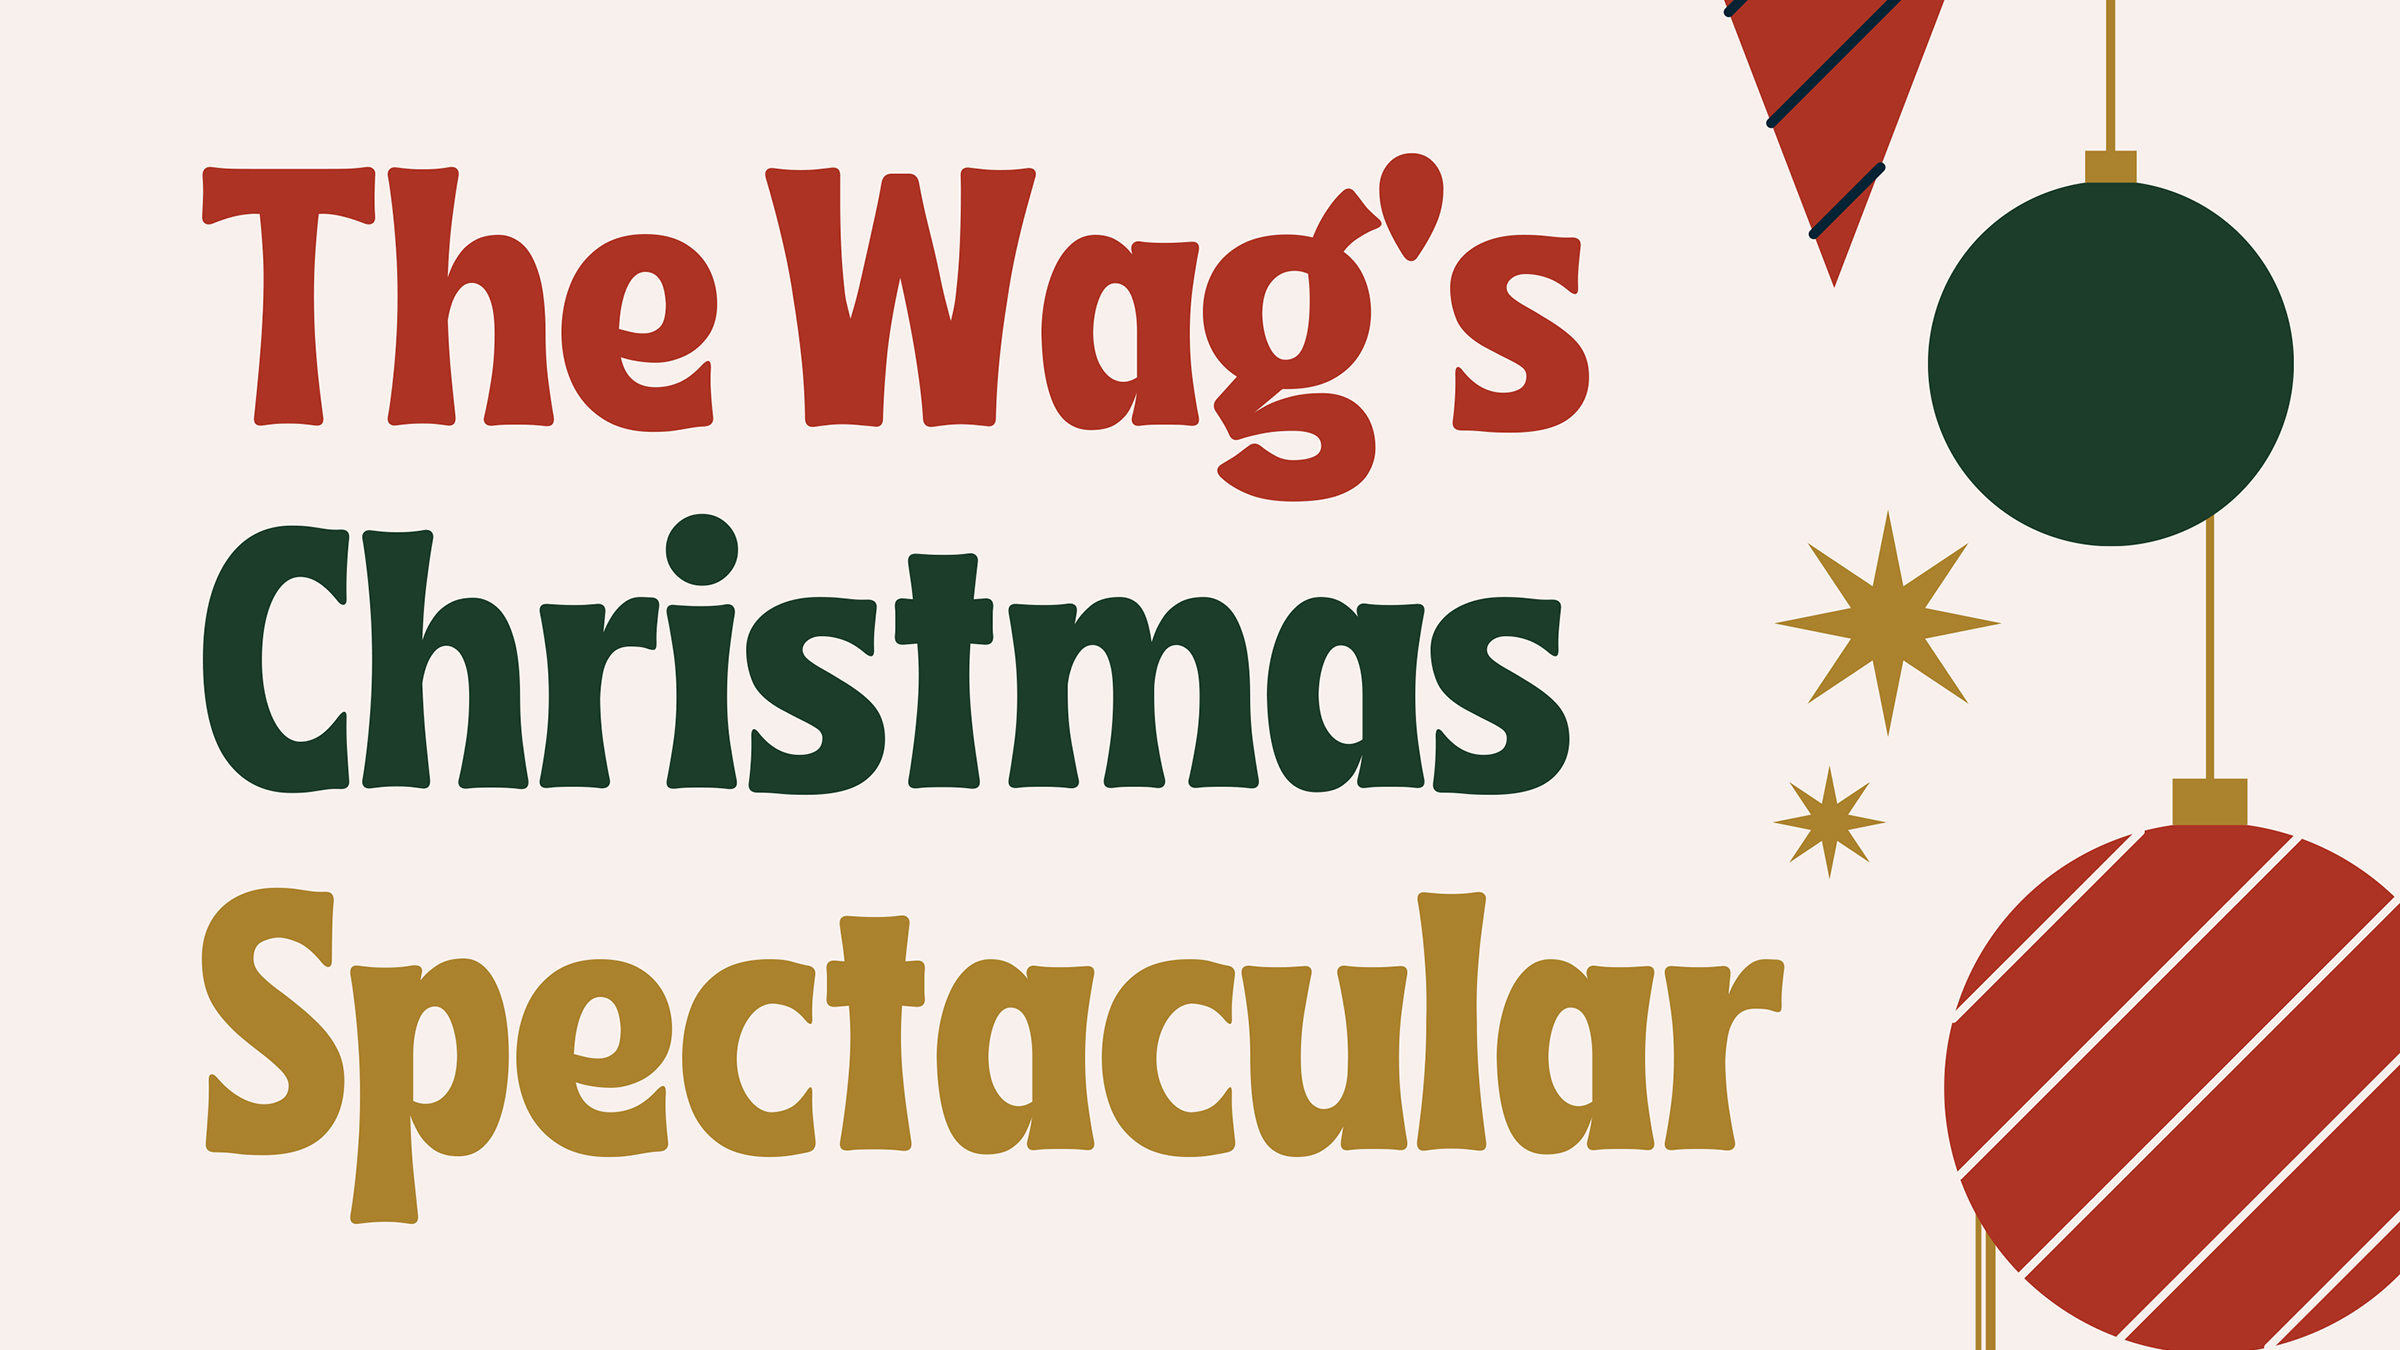 The Wag's Christmas Spectacular Family-Family Holiday Show Returns